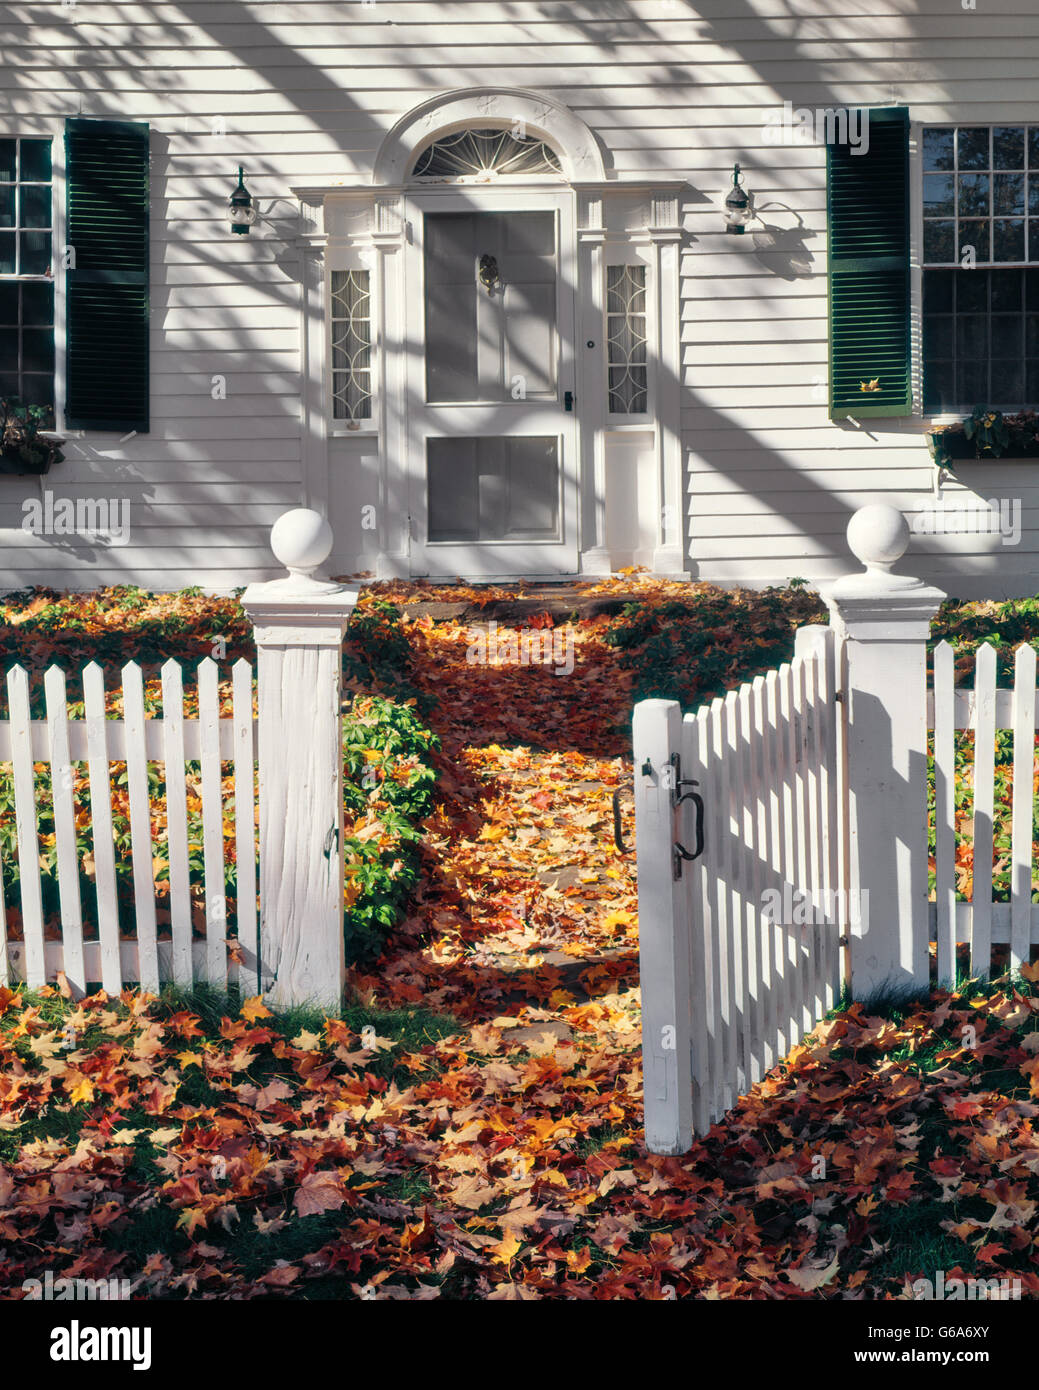 WHITE PICKET FENCE WITH OPEN GATE COLONIAL HOUSE AUTUMN LEAVES CRAFTSBURY VERMONT USA Stock Photo